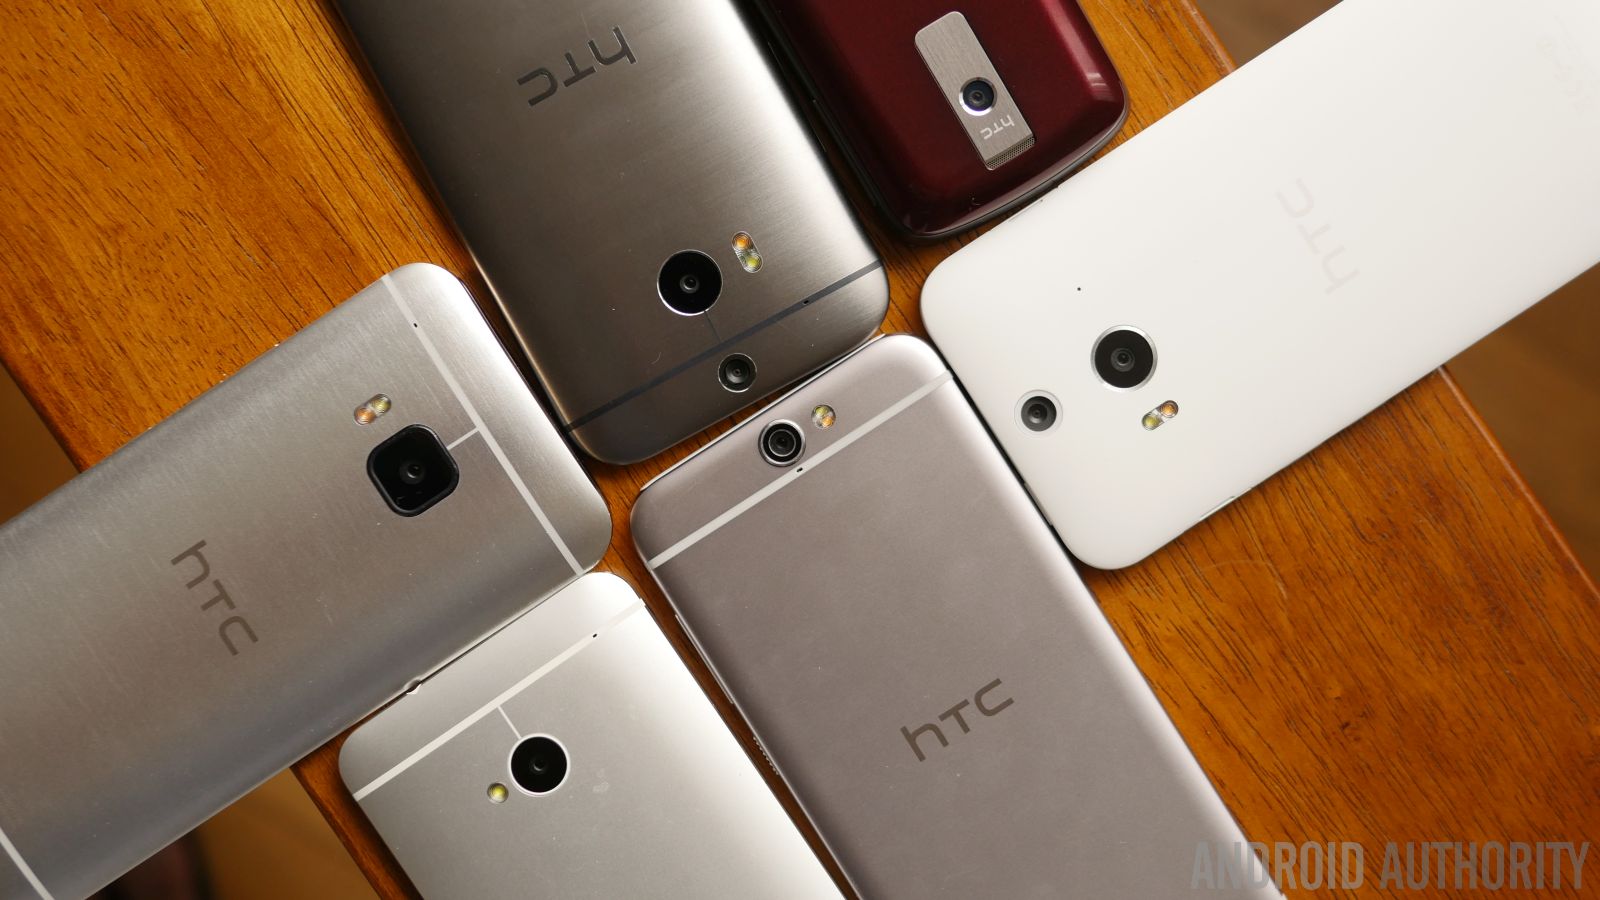 History of HTC's Android designs